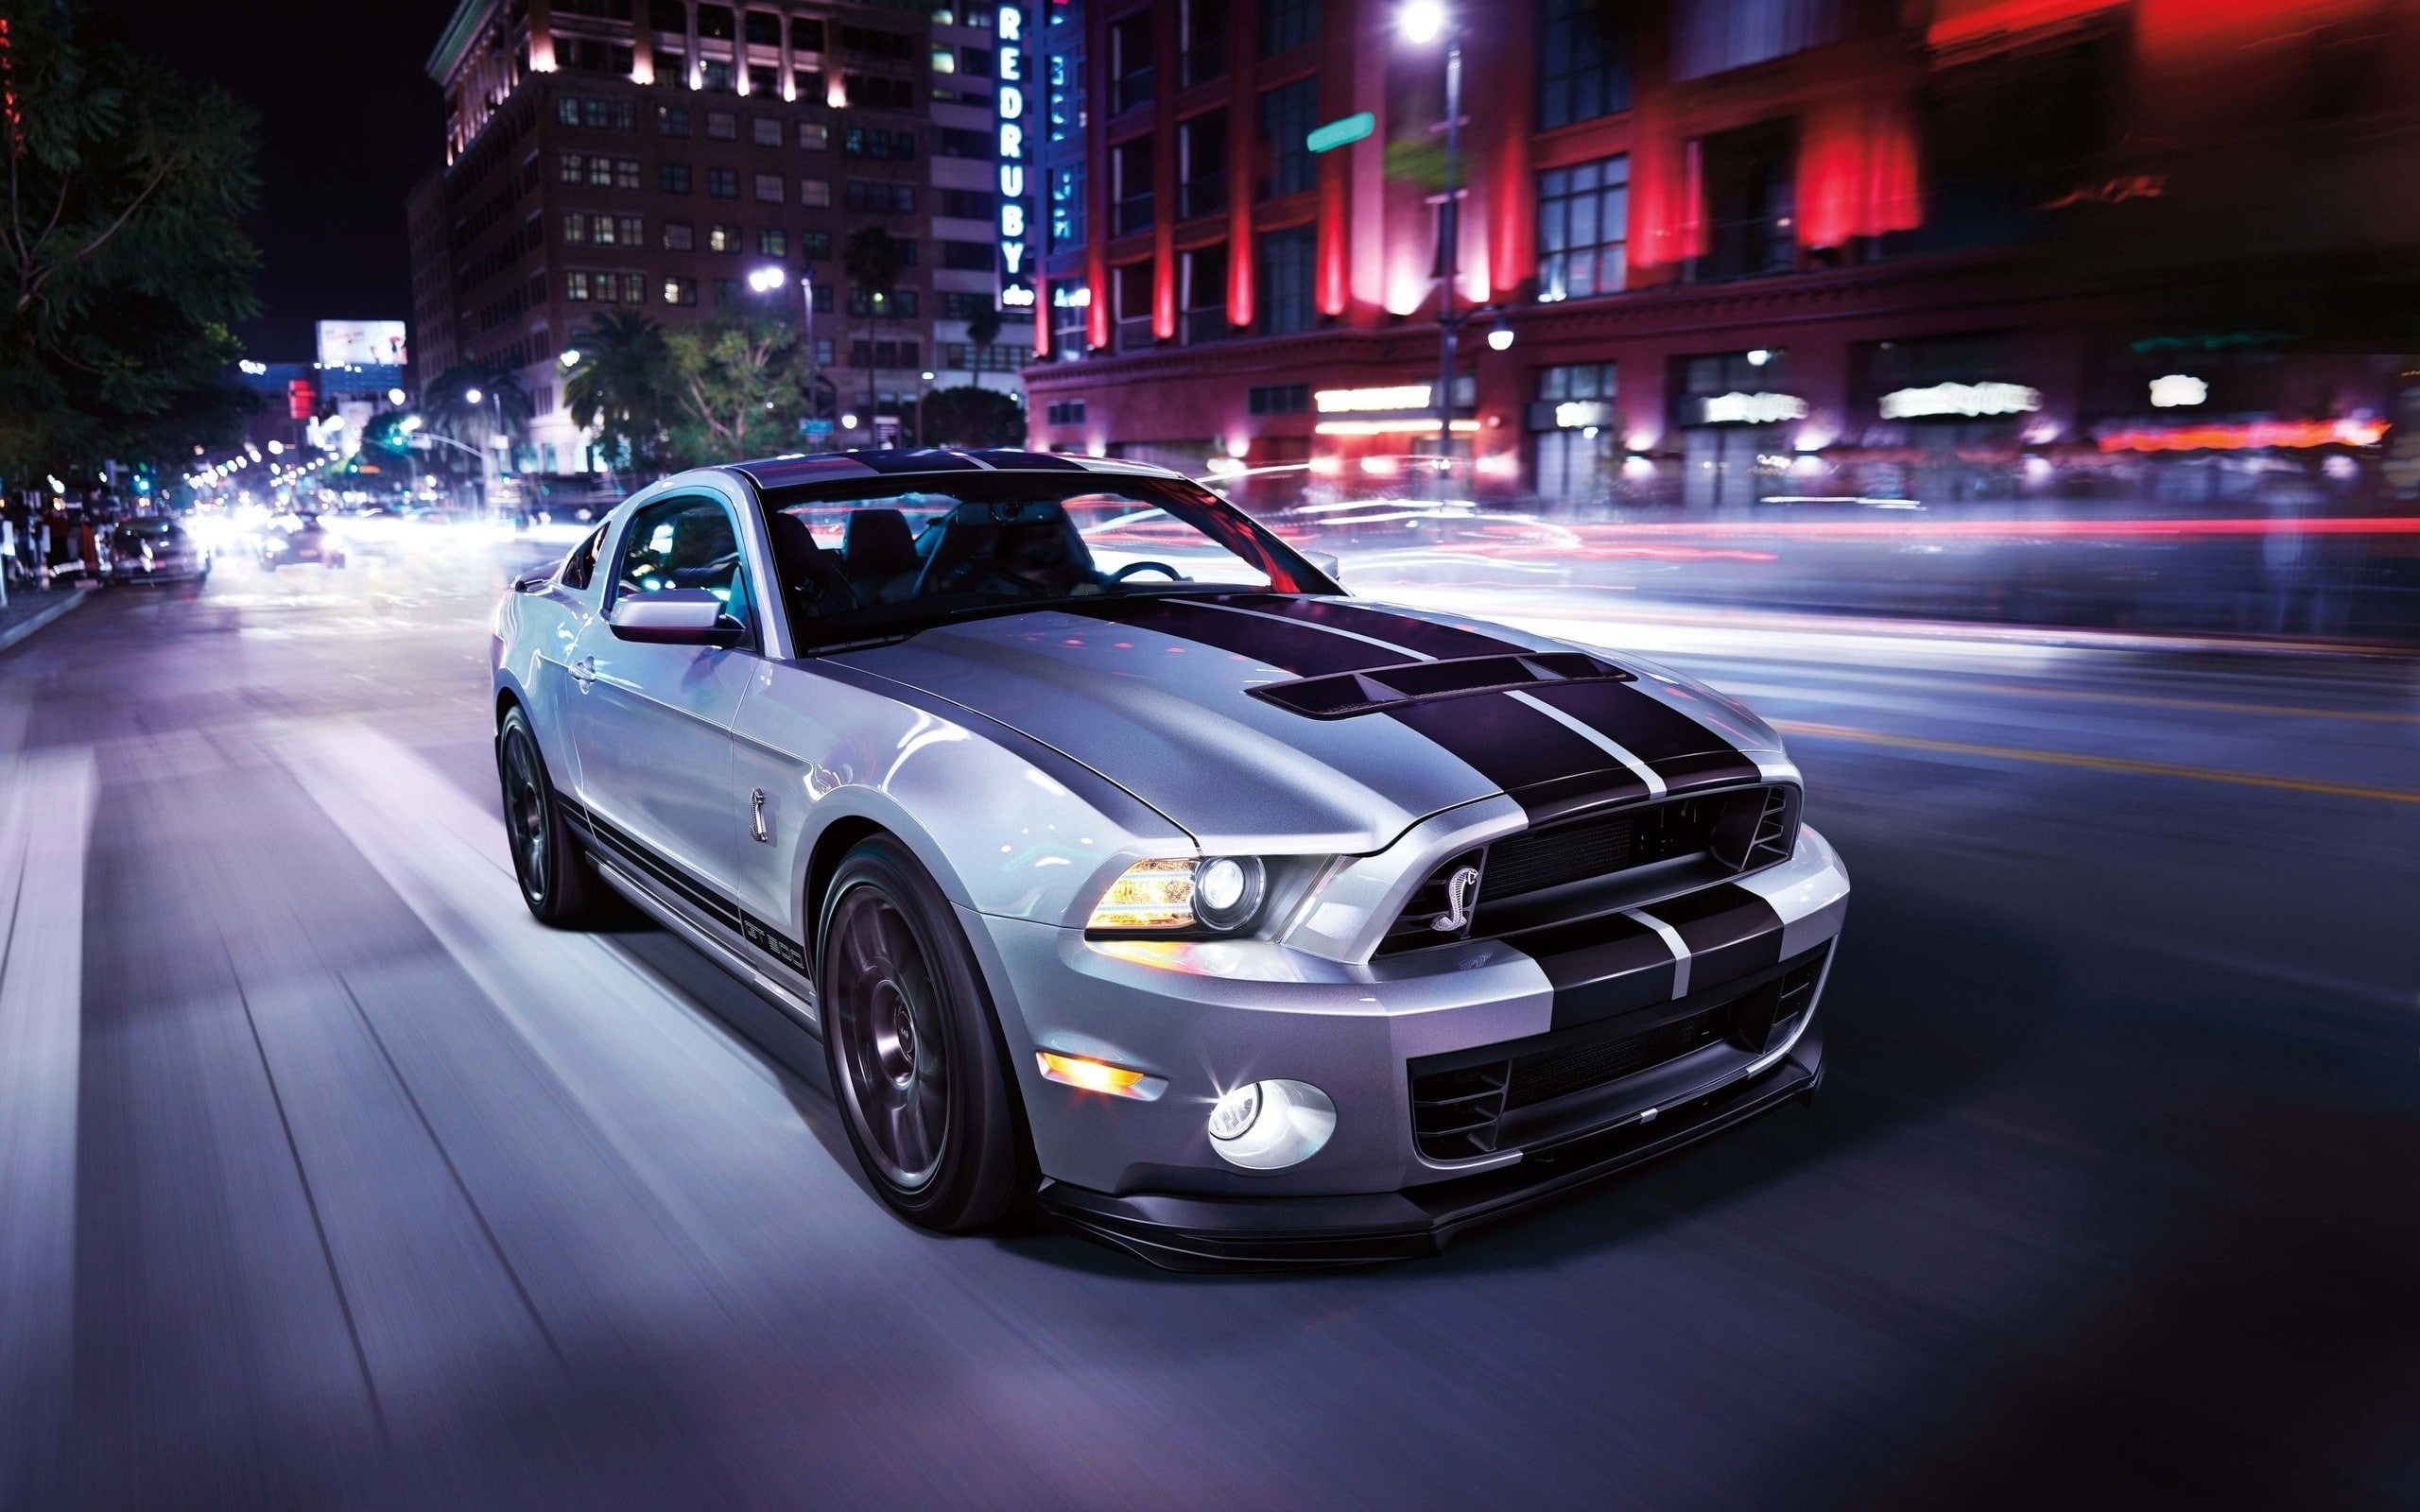 Ford Mustang Shelby GT 500, Car, Motion Blur, Night, Street, silver and black shelby mustang